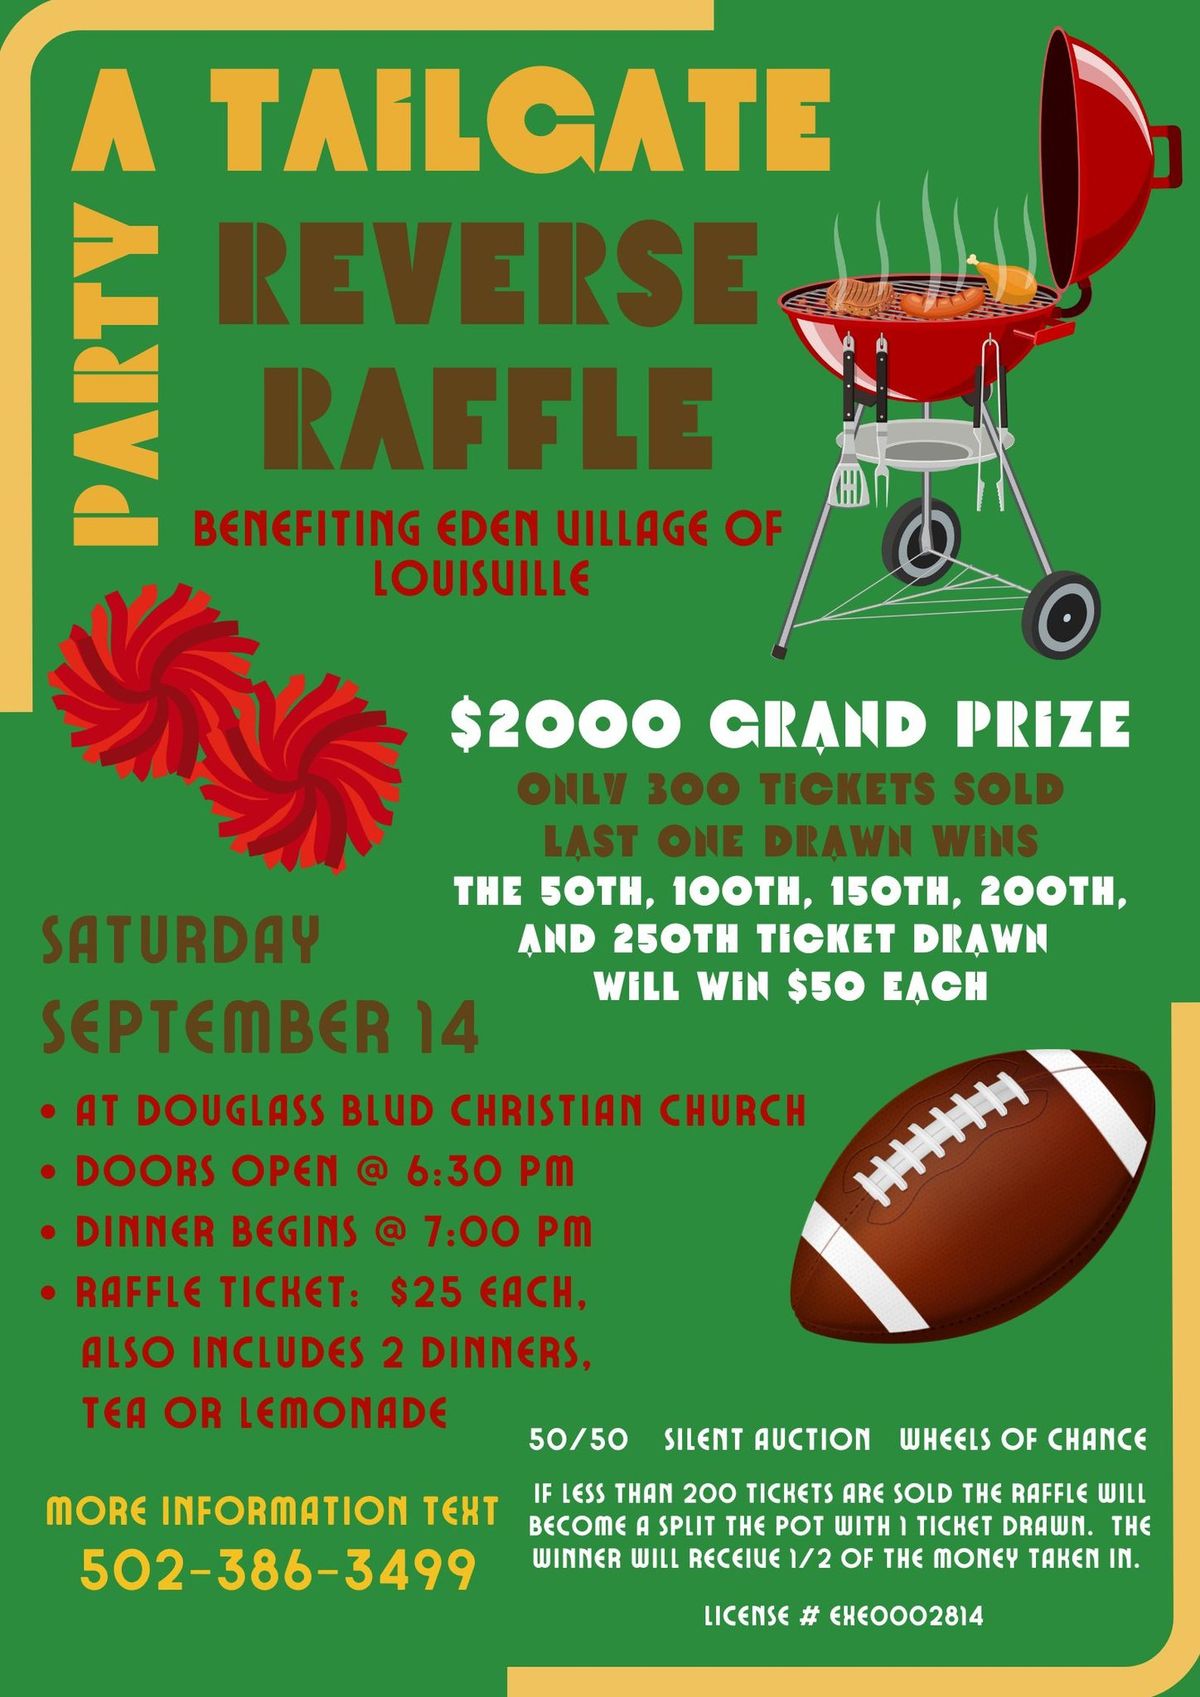 A Tailgate Party Reverse Raffle Fundraiser 